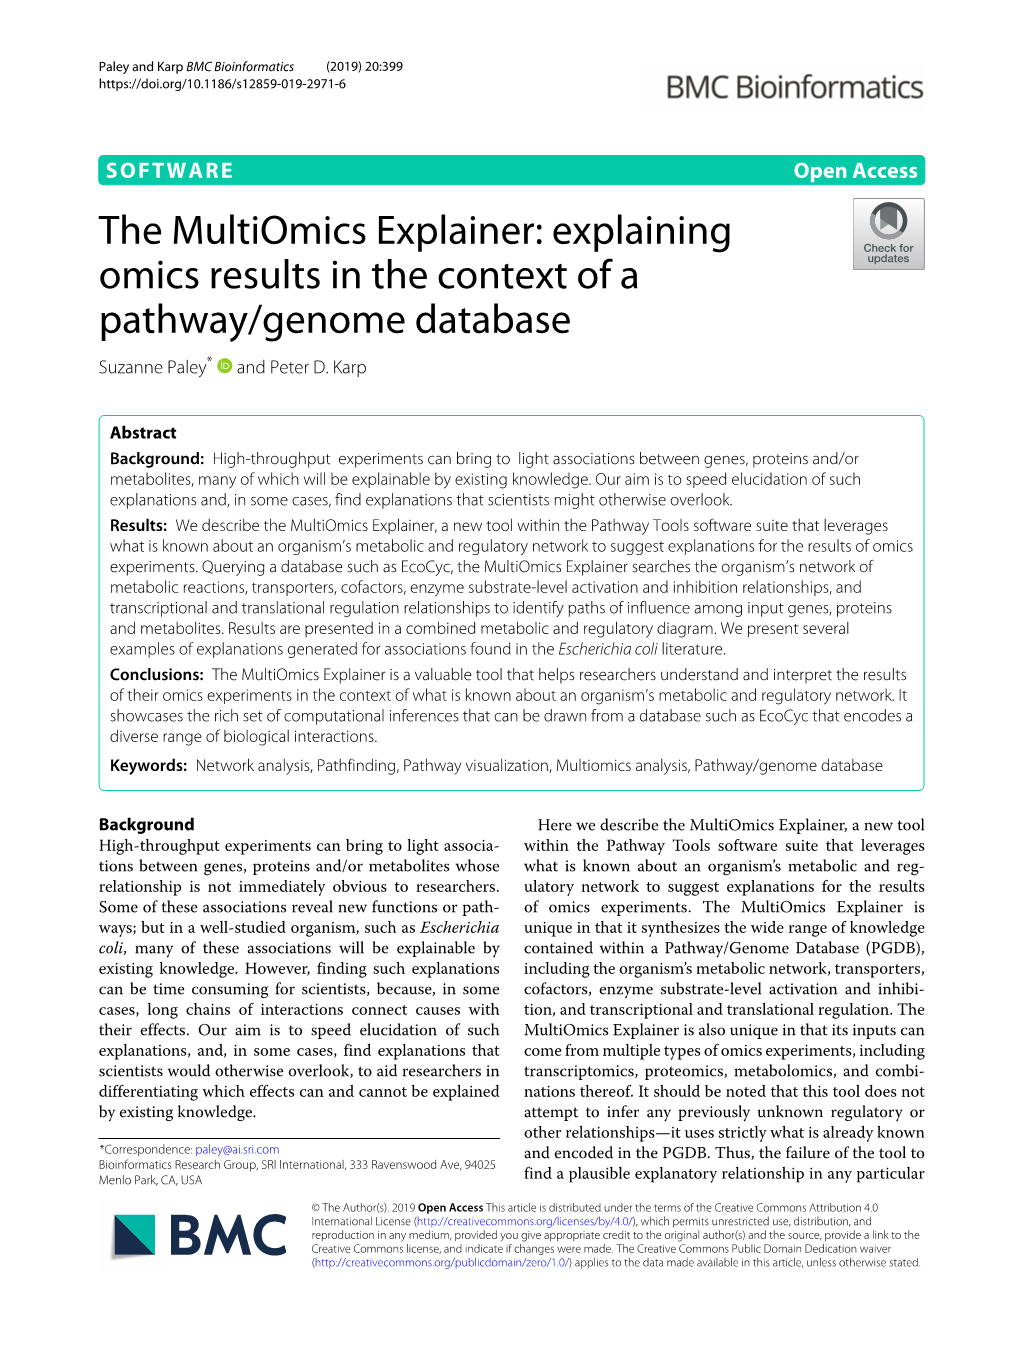 The Multiomics Explainer: Explaining Omics Results in the Context of a Pathway/Genome Database Suzanne Paley* and Peter D